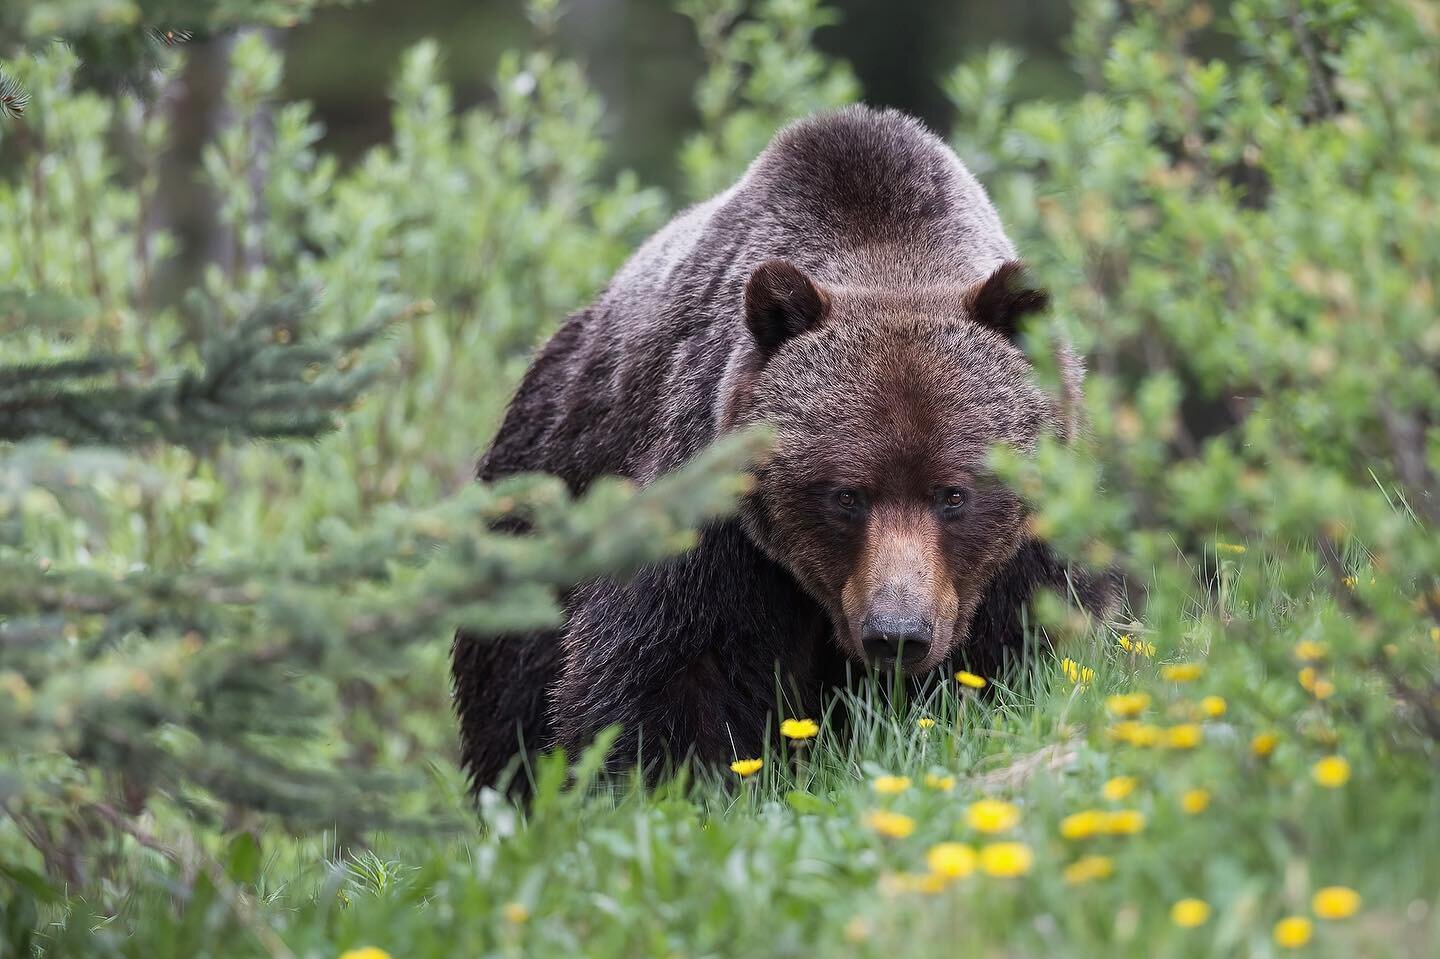 Happy first day of Spring!🌼

It won&rsquo;t be long now until these beauties reappear on the landscape! Some large males might already be out and about here in the Canadian Rockies.

Typically the order of grizzlies emerging from dens is: male grizz